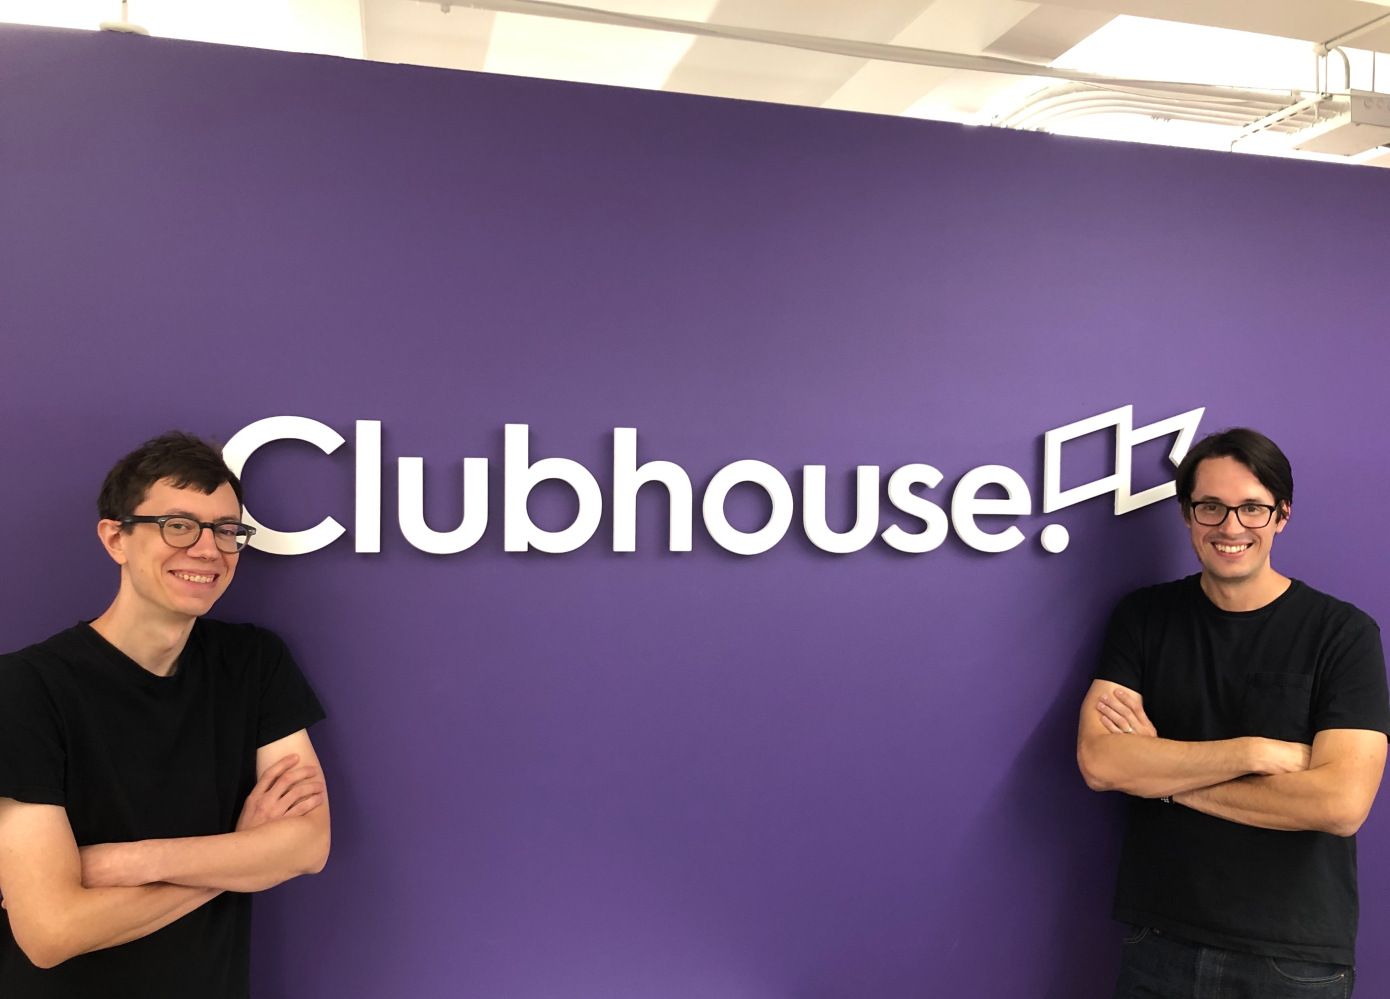 Key insights about Clubhouse that marketers should know